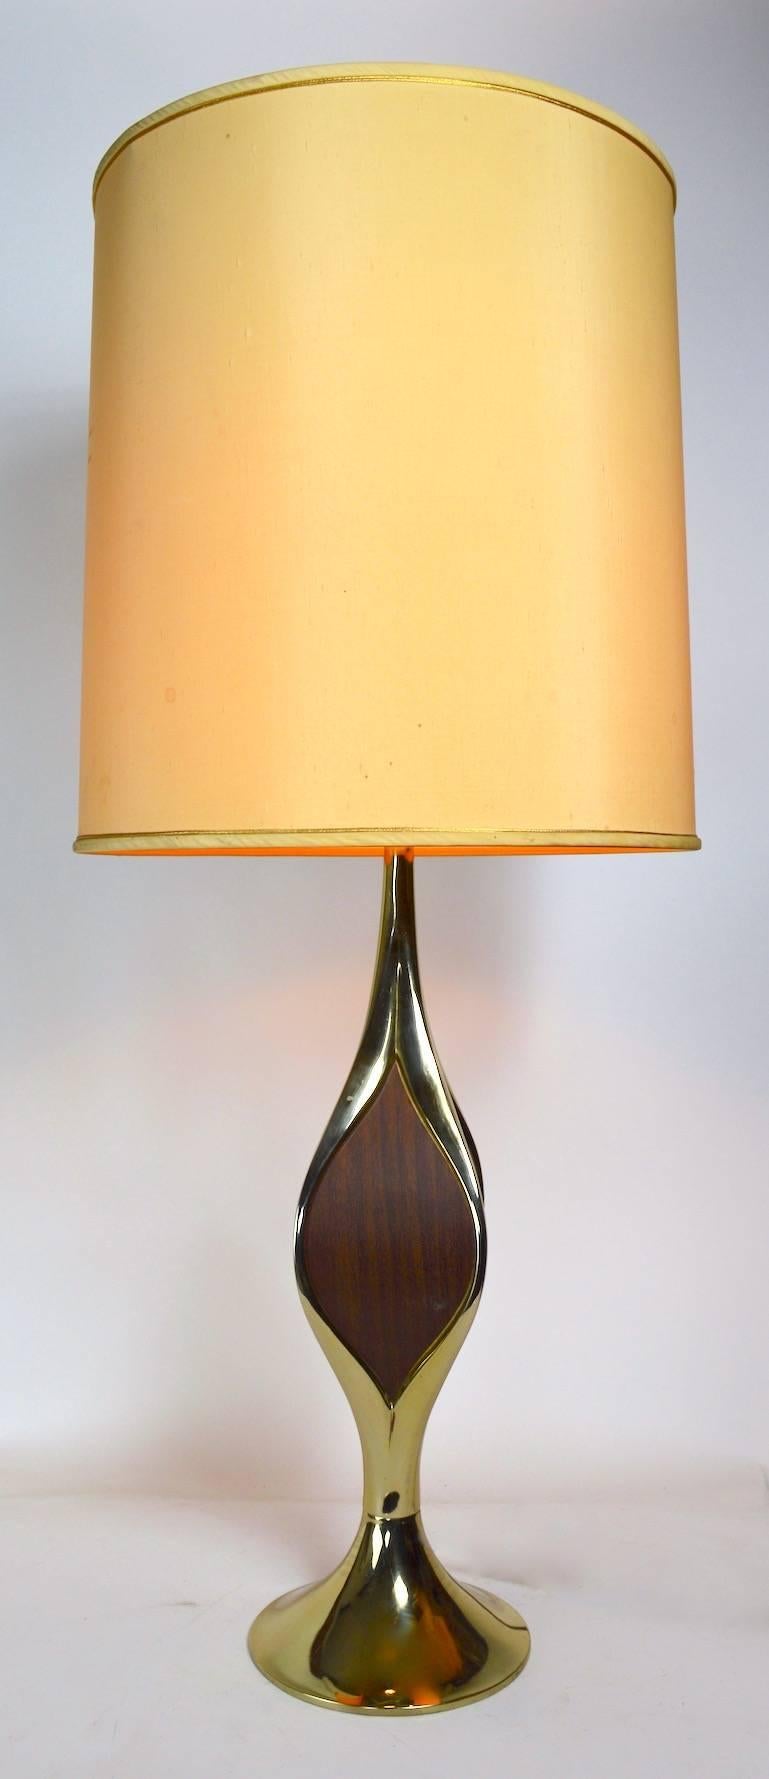 Classic Gerald Thurston for Lightolier Mid-Century Modern table lamp. Brass colored metal with faux wood insert trim, on teardrop form base. Working, clean, original condition, shows minor cosmetic wear normal and consistent with age, shade not